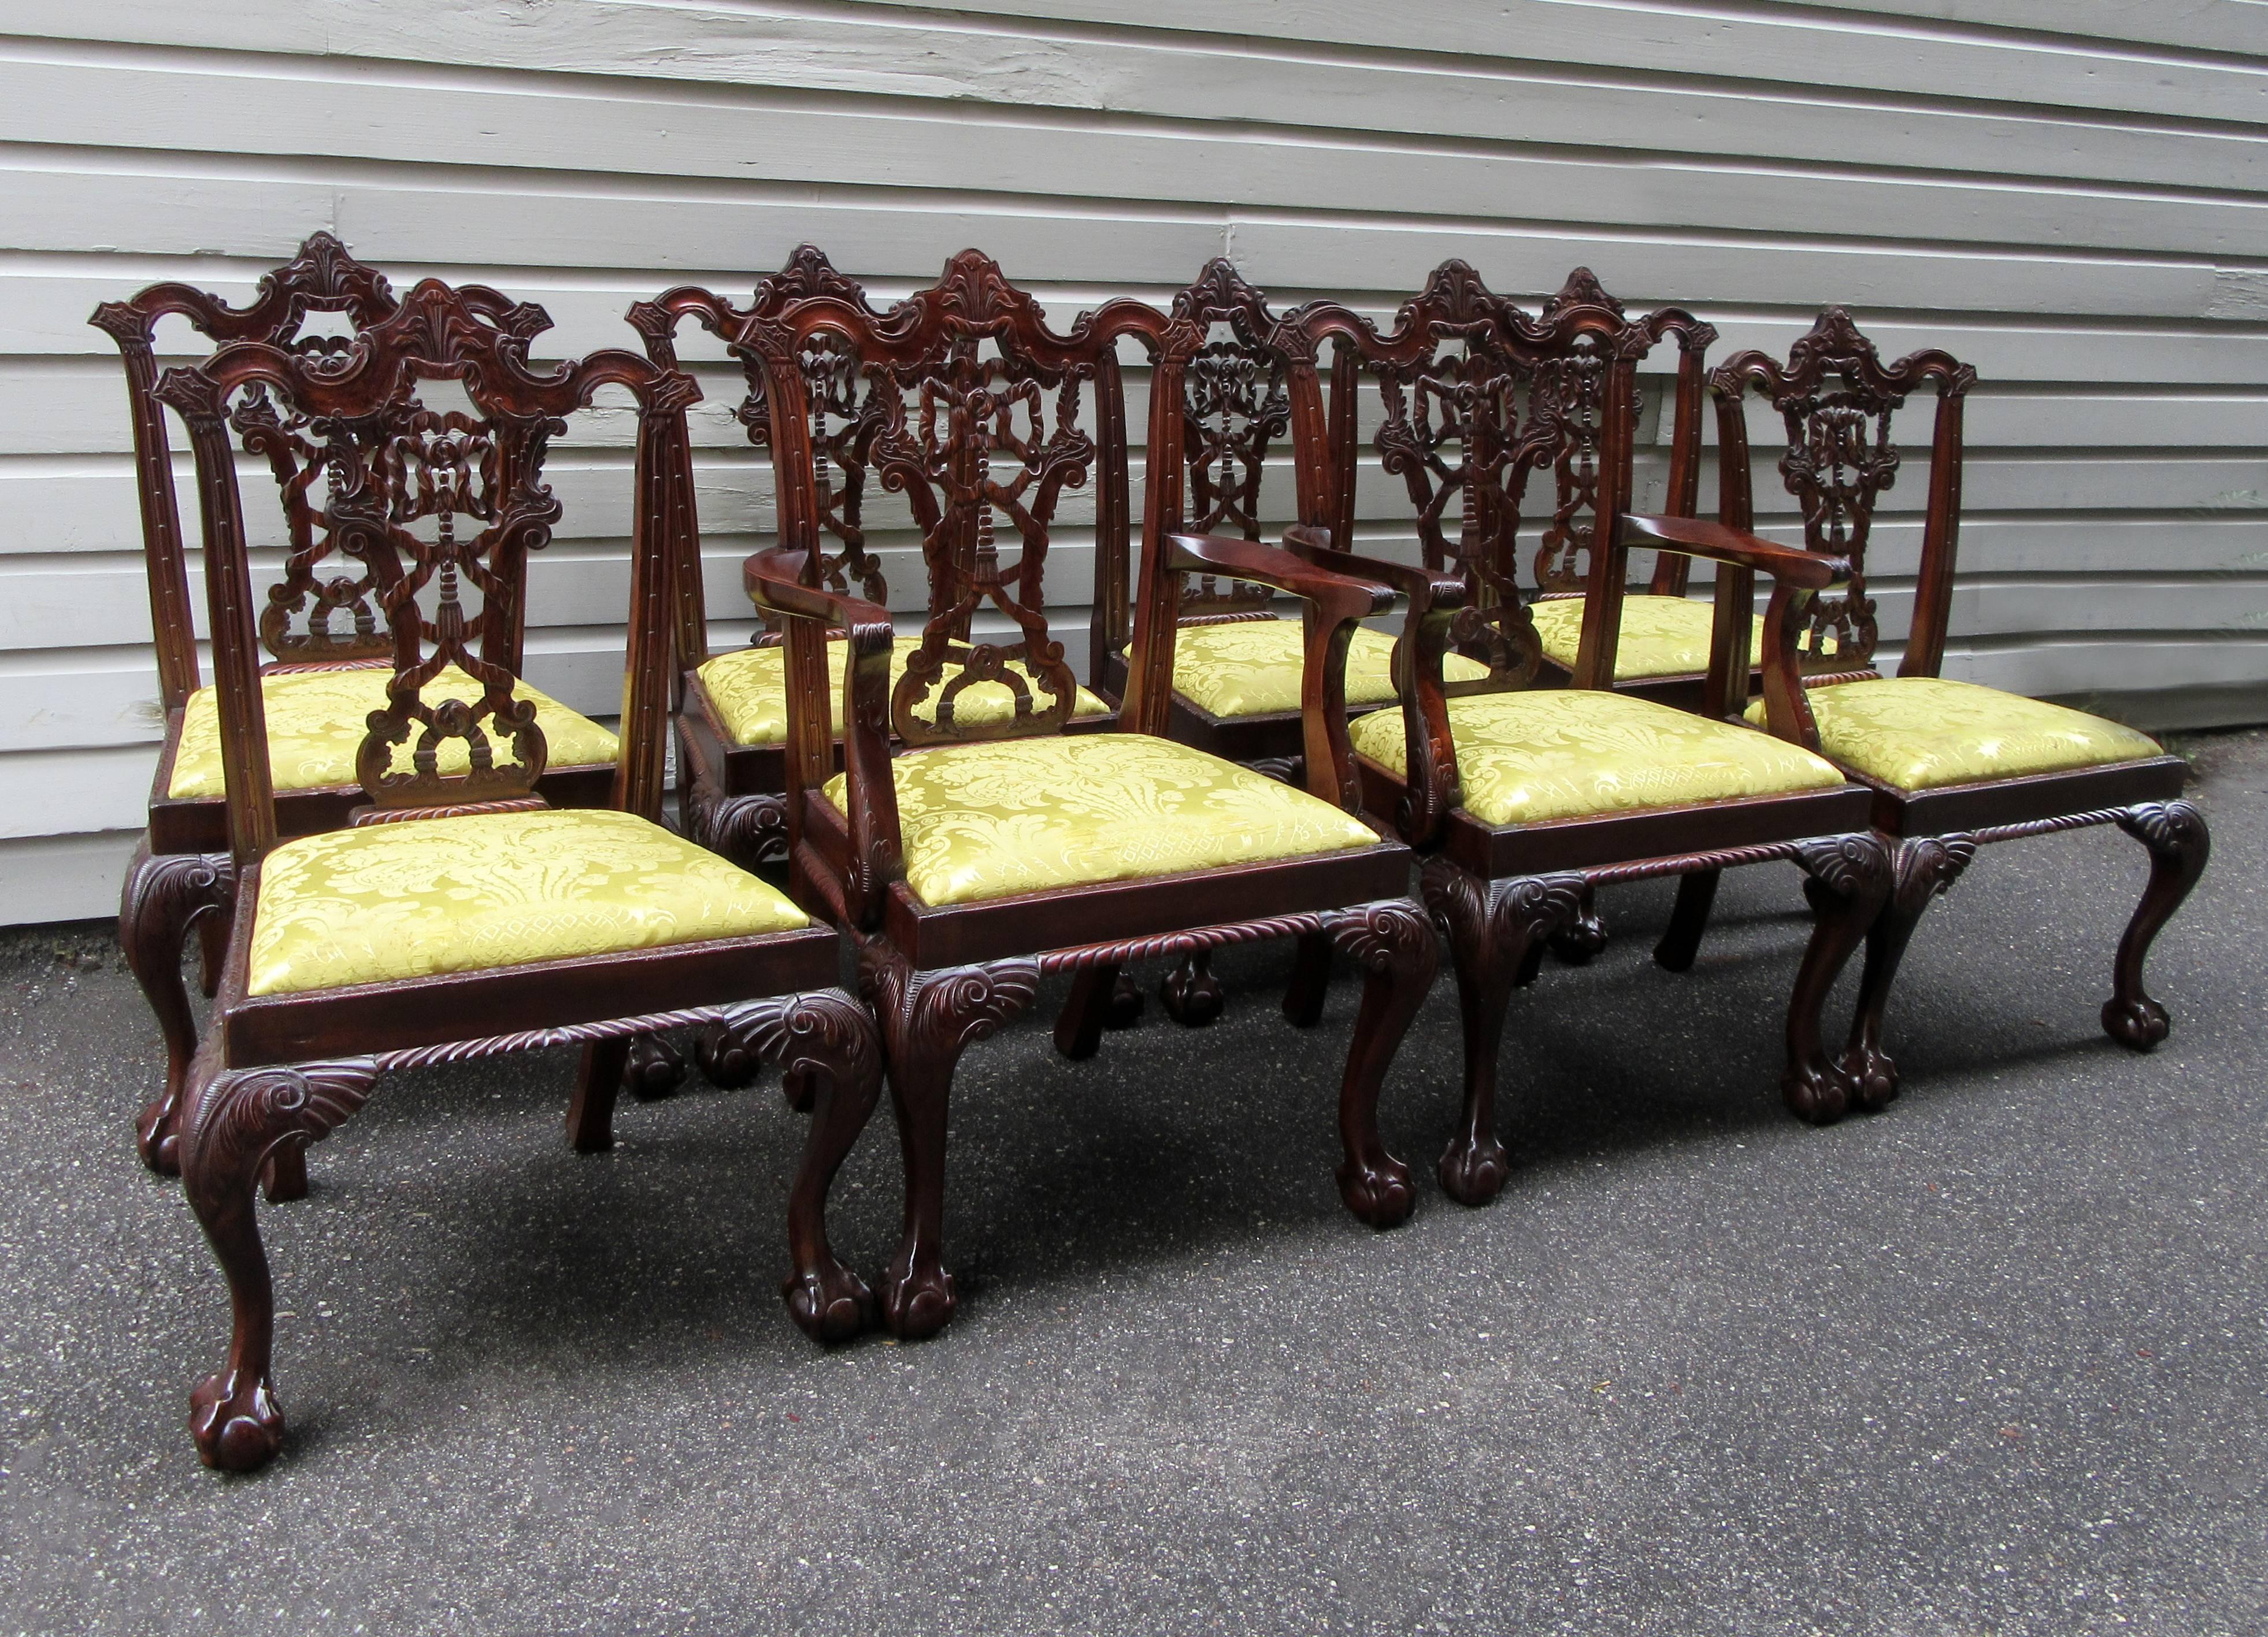 A set of eight English Chinese Chippendale mahogany dining chairs, circa 1900, featuring finely carved ribbon and tassel backs, claw and ball feet and chartreuse silk damask upholstered seats. The upholstery is in good condition but still very